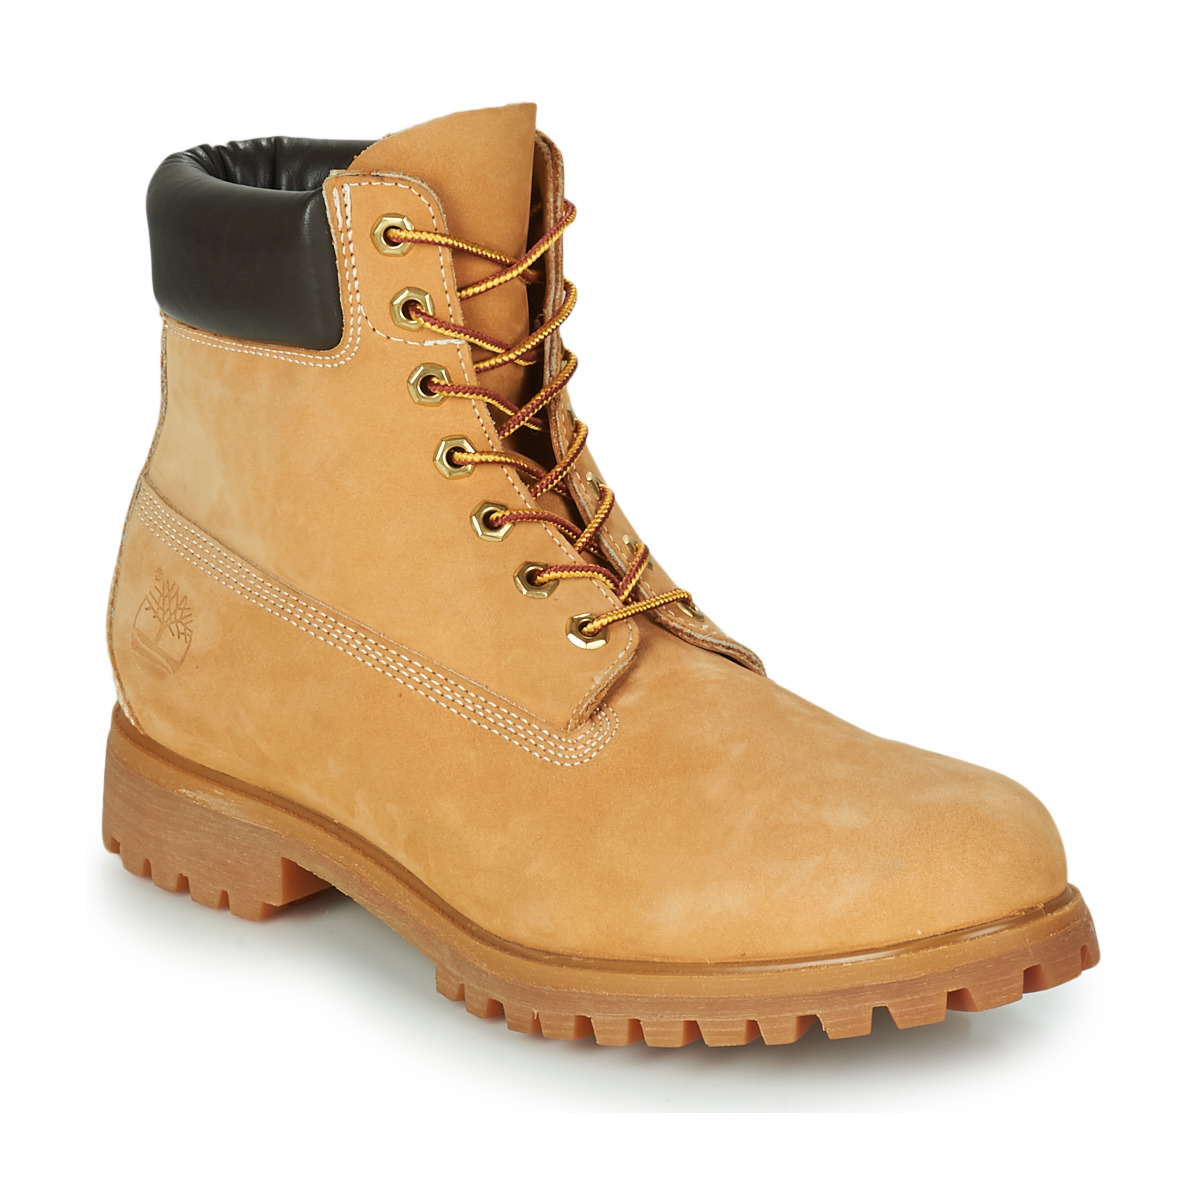 Timberland PREMIUM BOOT 6'' Wheat - Free delivery | Spartoo NET ! Shoes Mid boots Men USD/$235.50